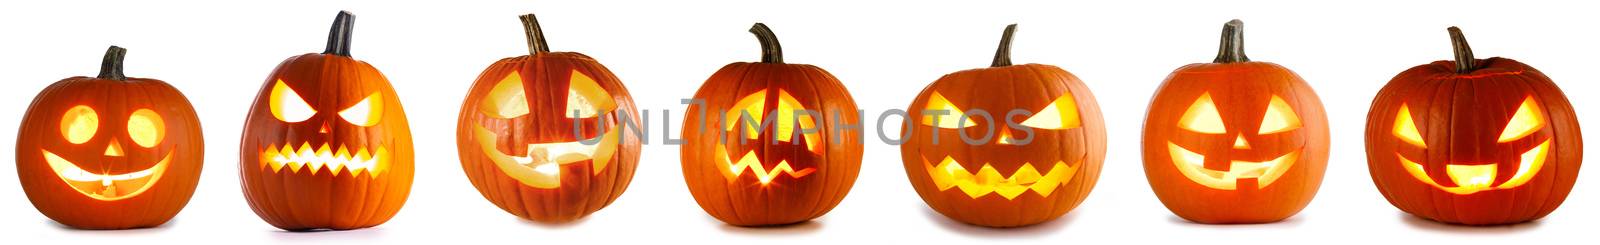 A collection of Jack O Lantern Halloween pumpkins with various different designs isolated on white background